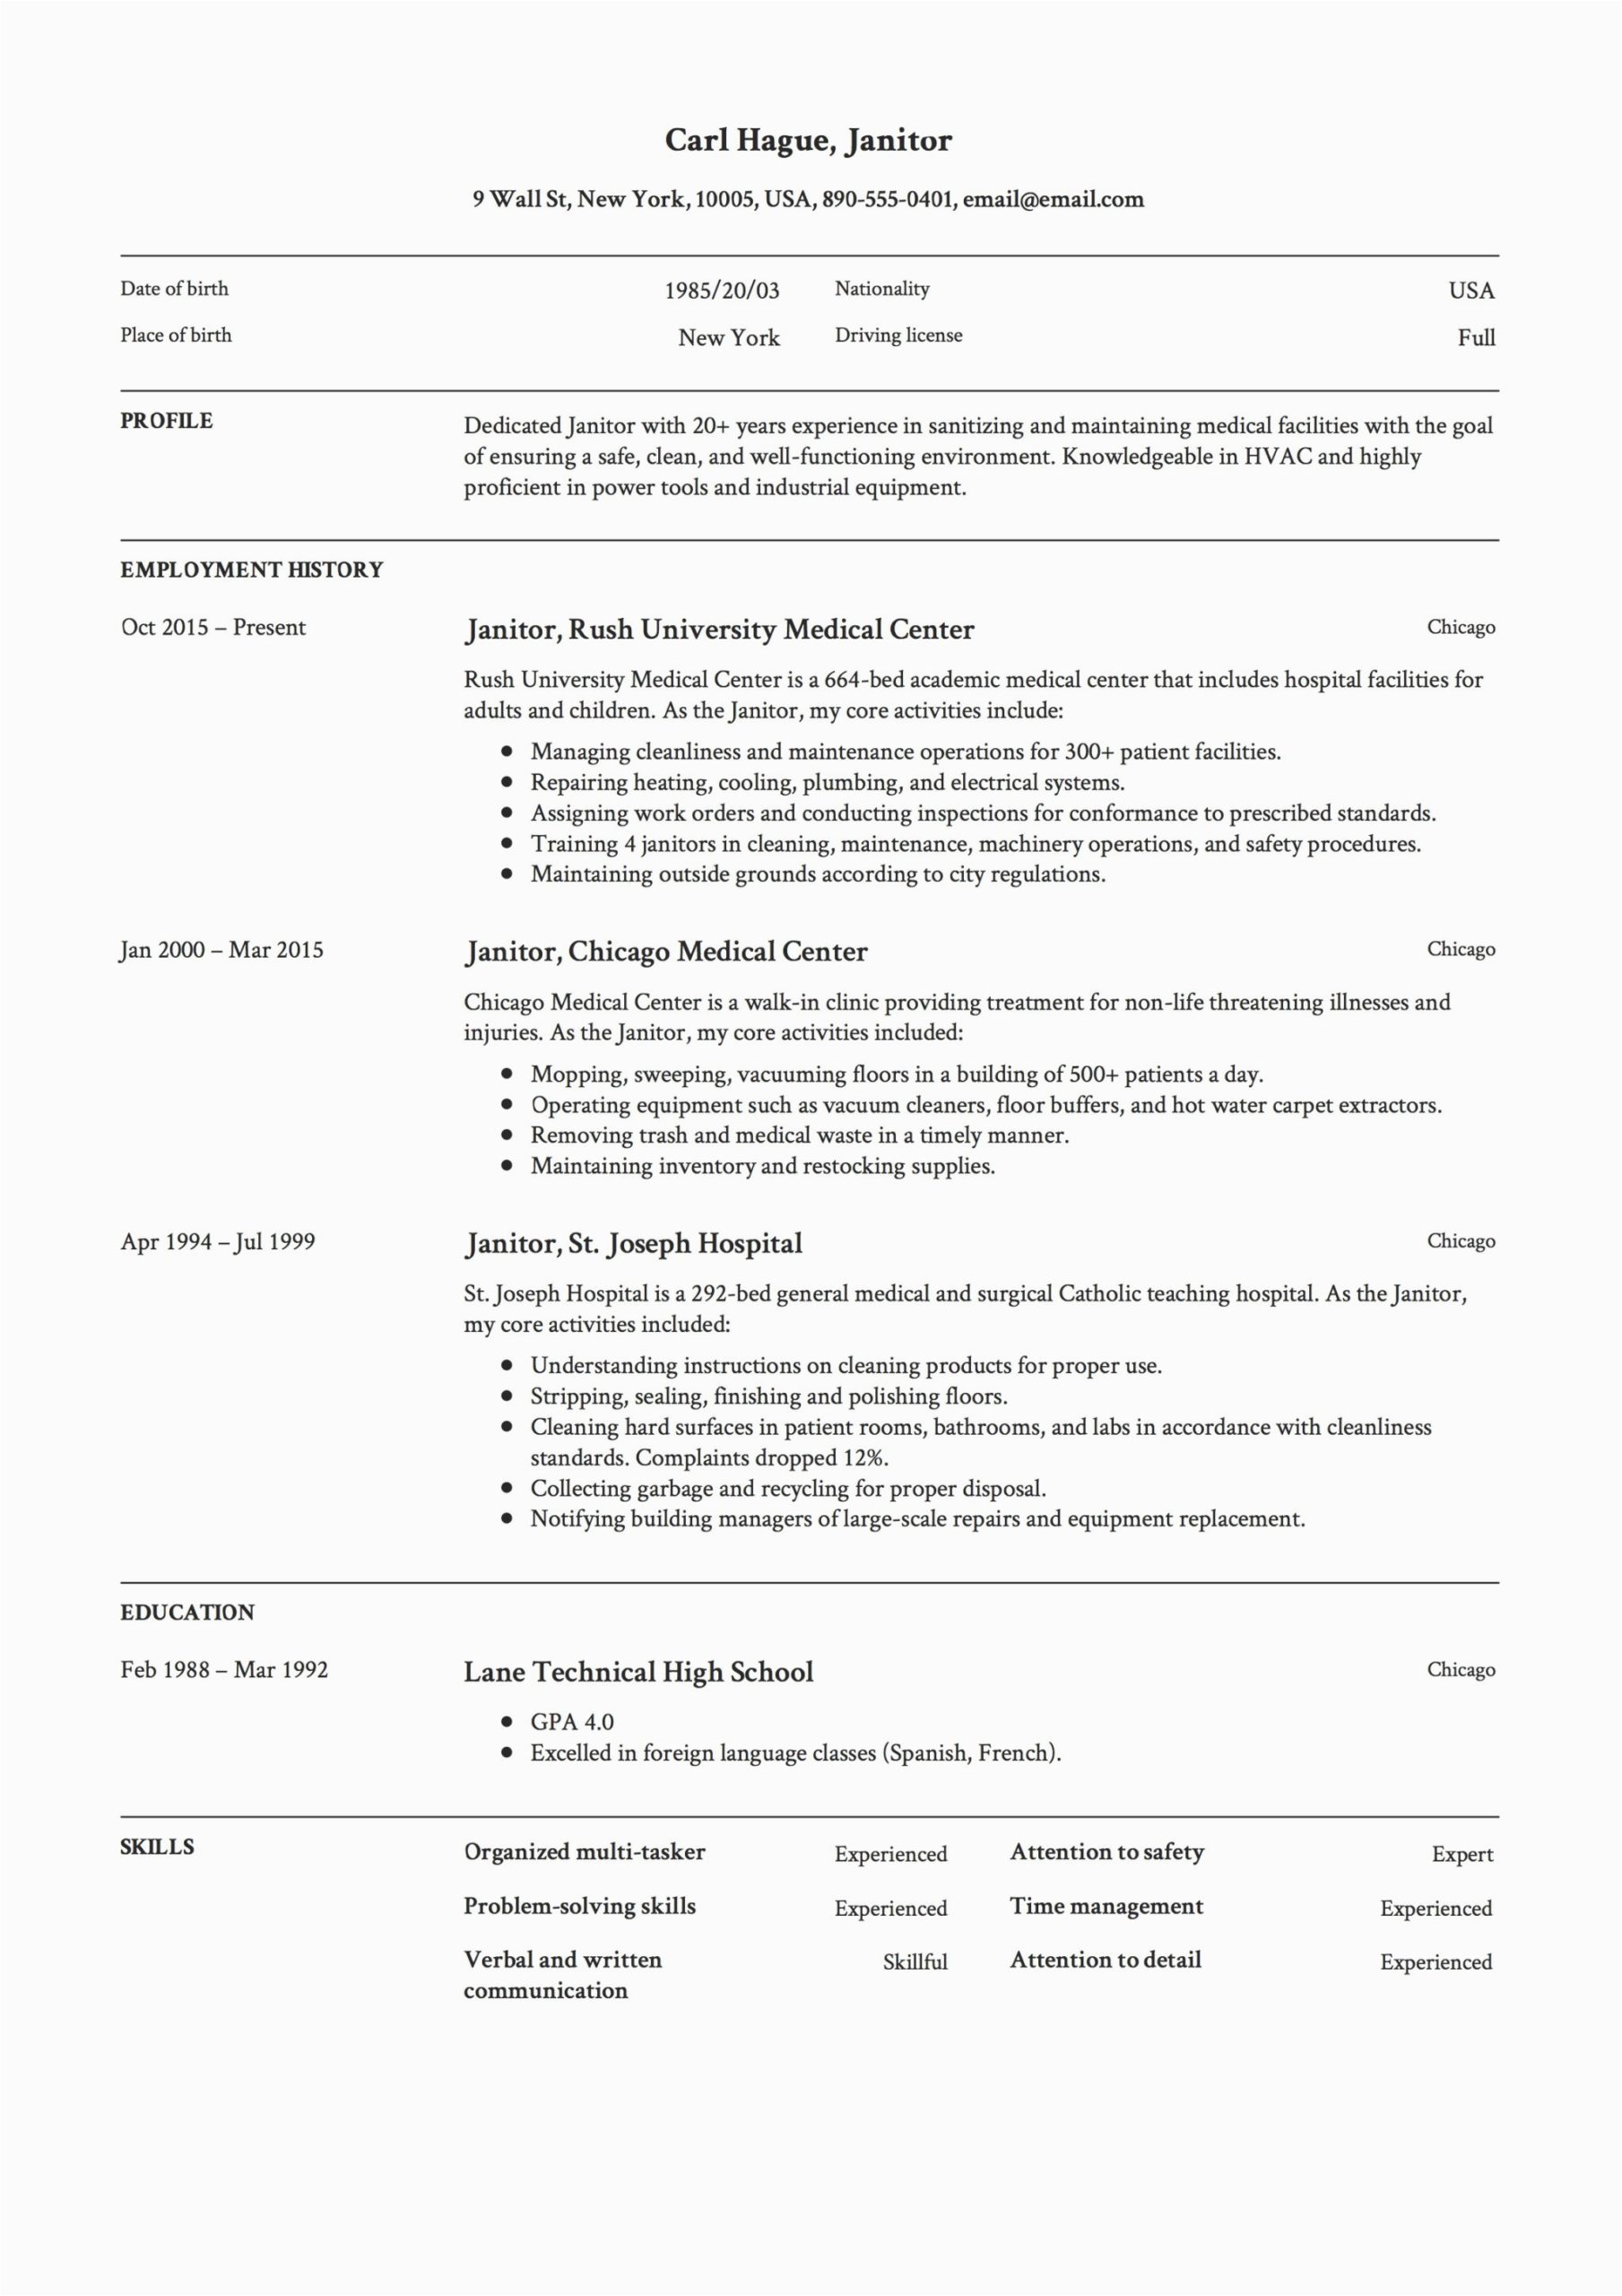 Free Resume Samples for Janitorial Positions Full Guide Janitor Resume Example [ 12 Samples ] Pdf